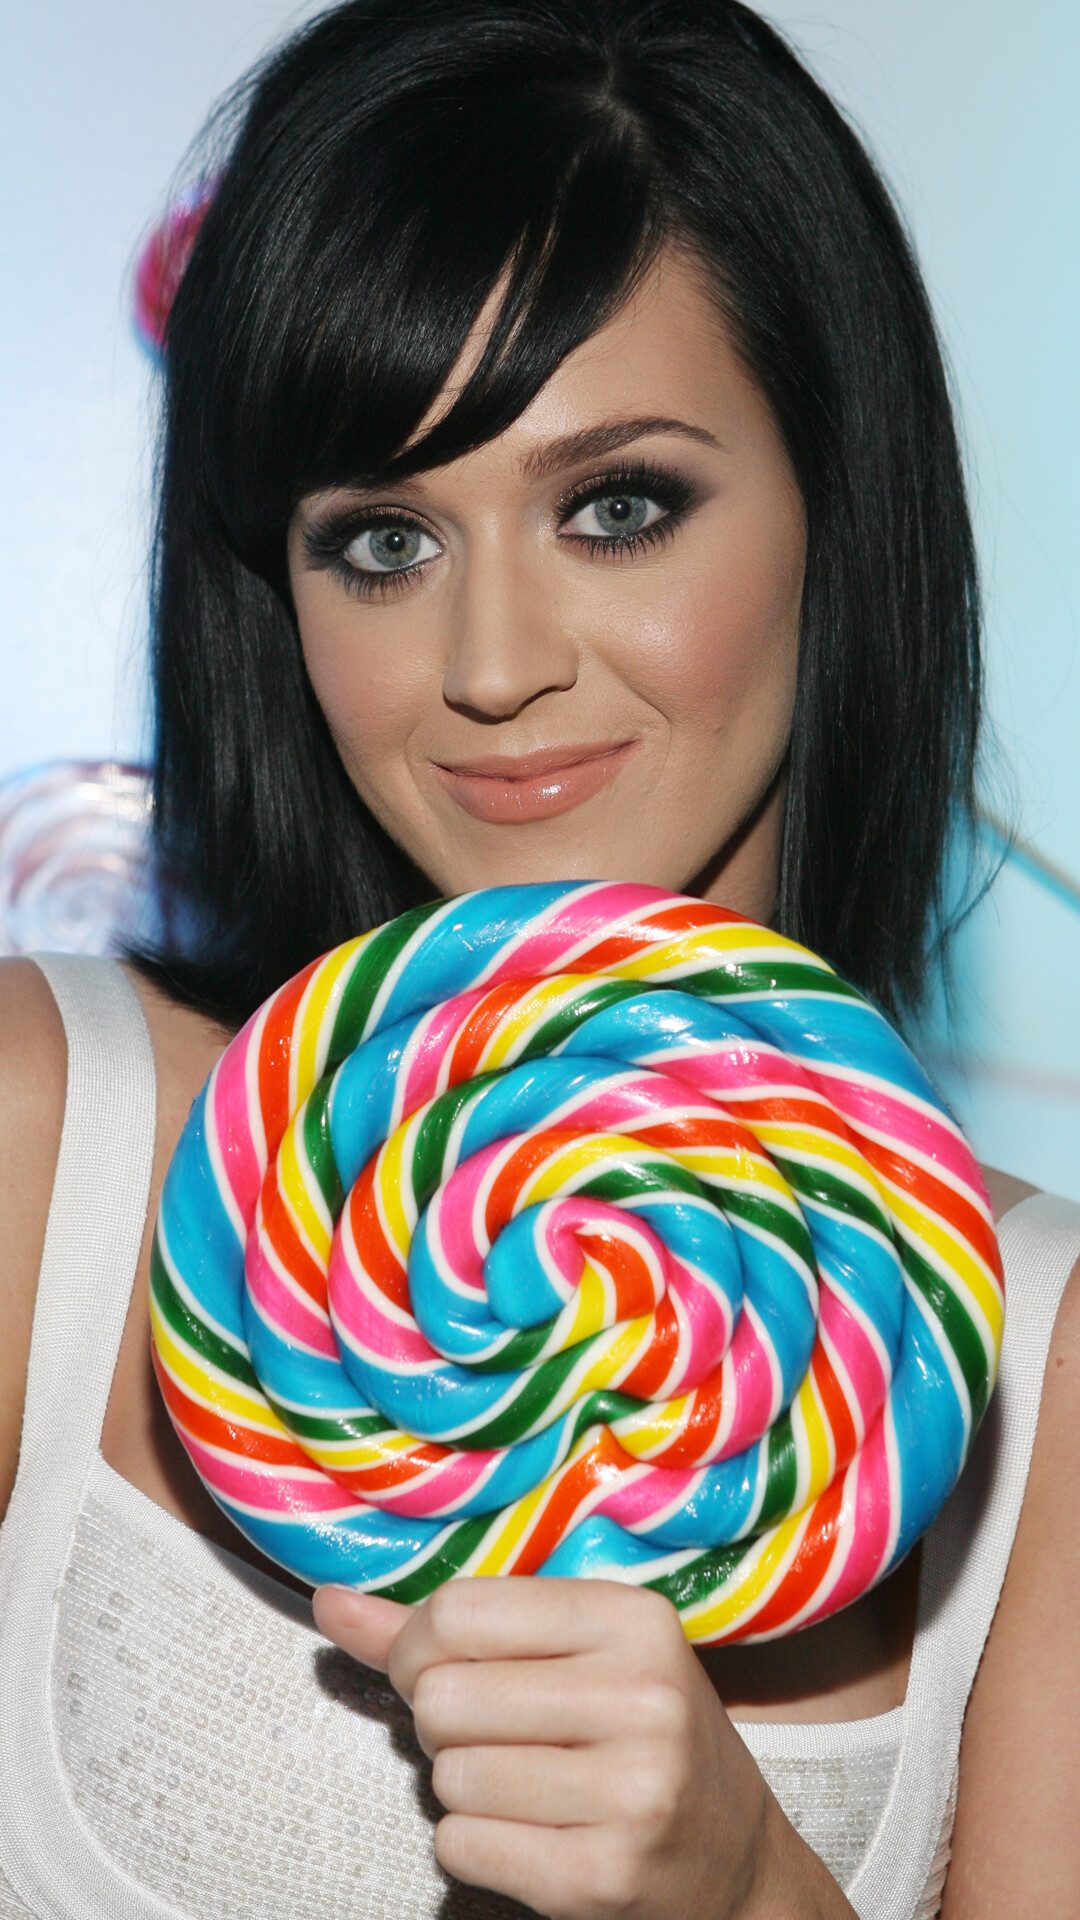 Katy Perry: Teenage Dream debuted at number one on the US Billboard 200. 1080x1920 Full HD Wallpaper.